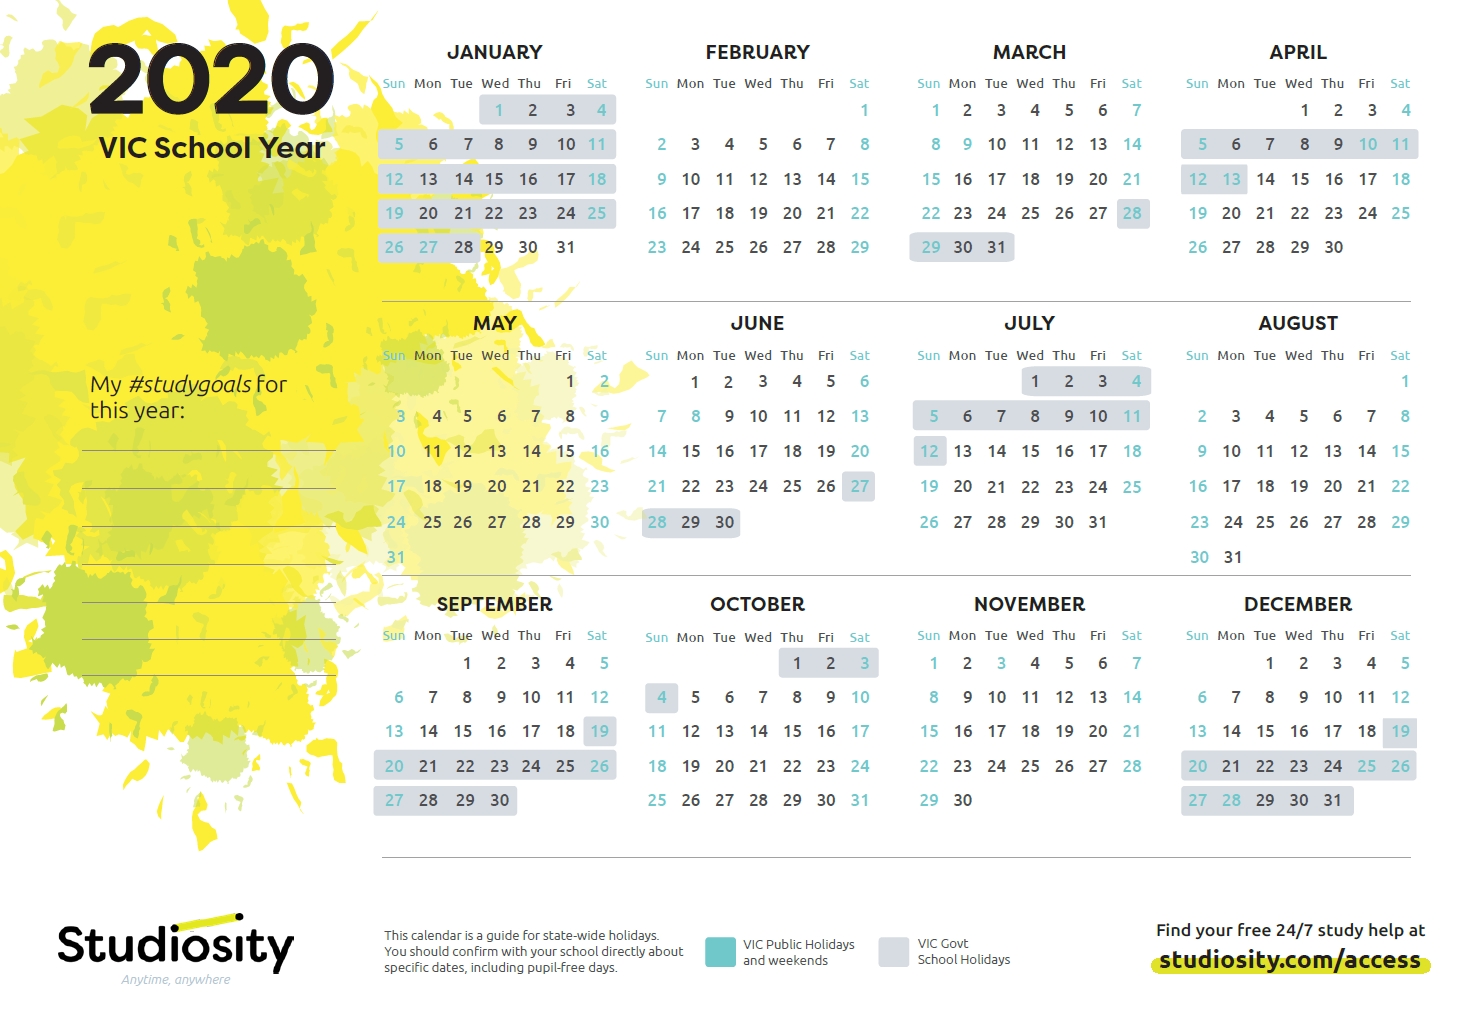 School Terms And Public Holiday Dates For Vic In 2020 Printable 2020 Calendar With School Terms And Public Holidays